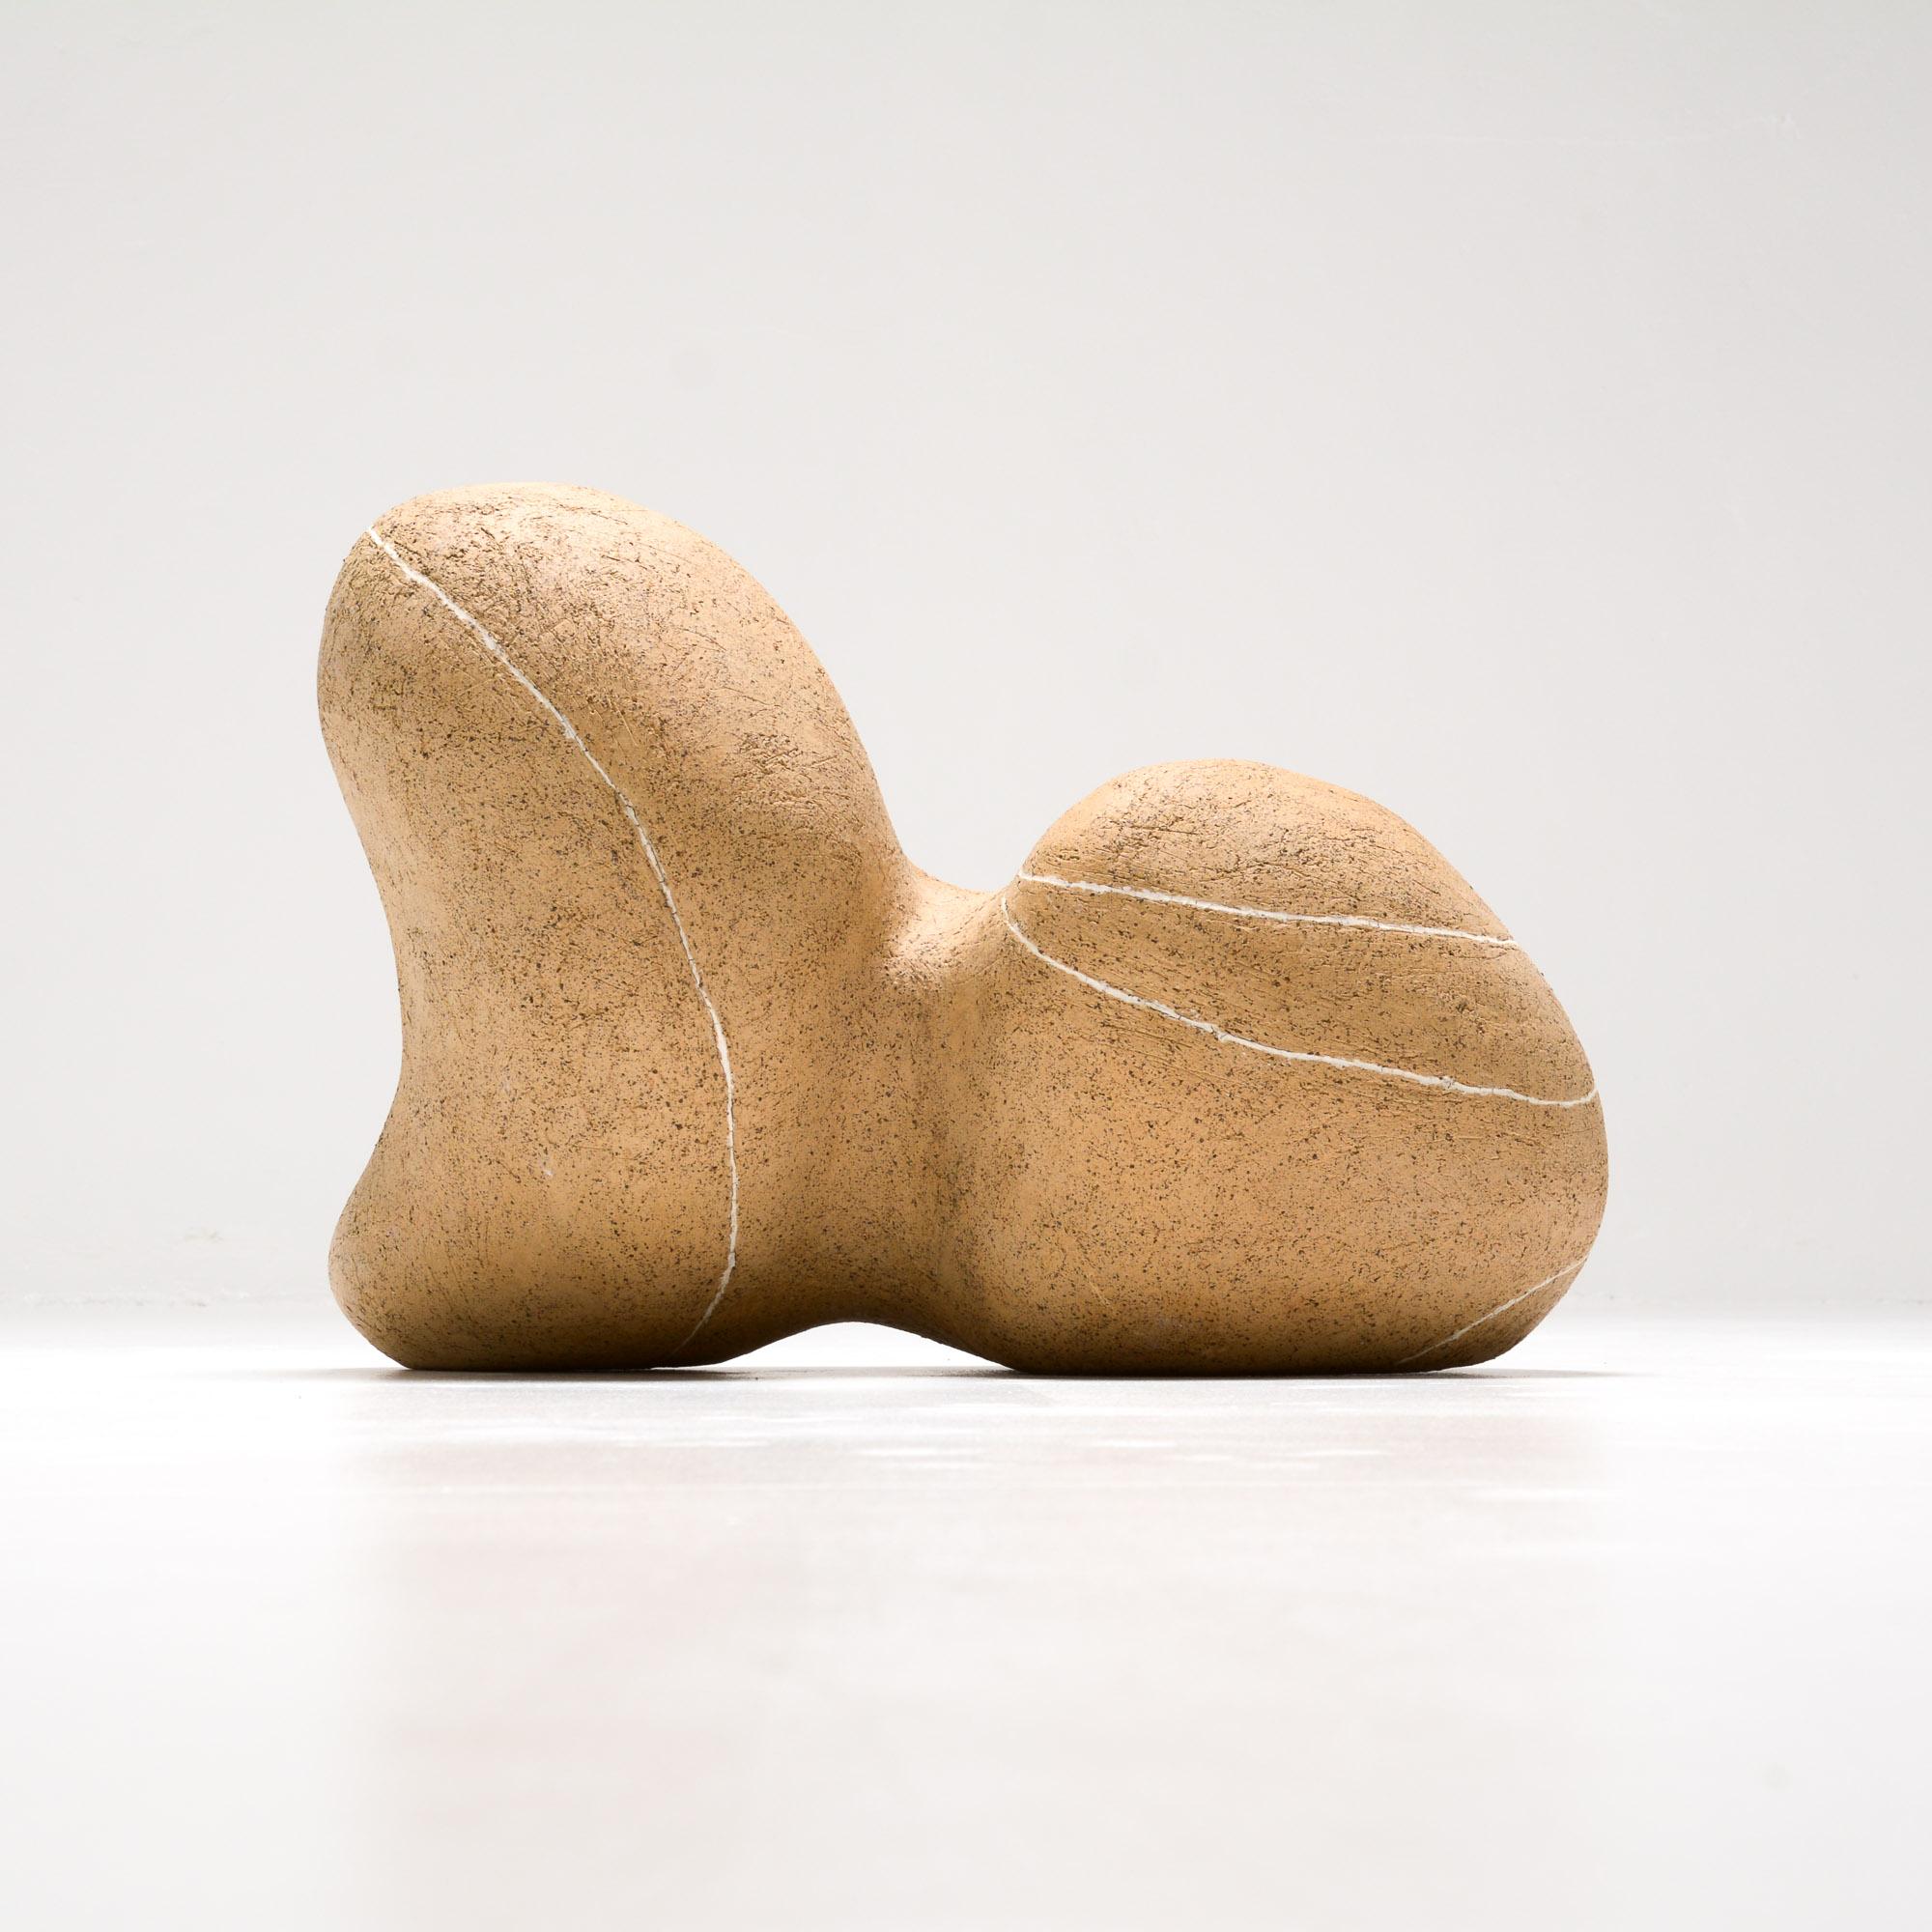 Dancing Stone 1 was created and made by Sabine Vermetten. The organic shape is inspired by dancing figures.
This ceramic sculpture is constructed from cork clay finished with white porcelain lines. The lines accentuate the shape of the